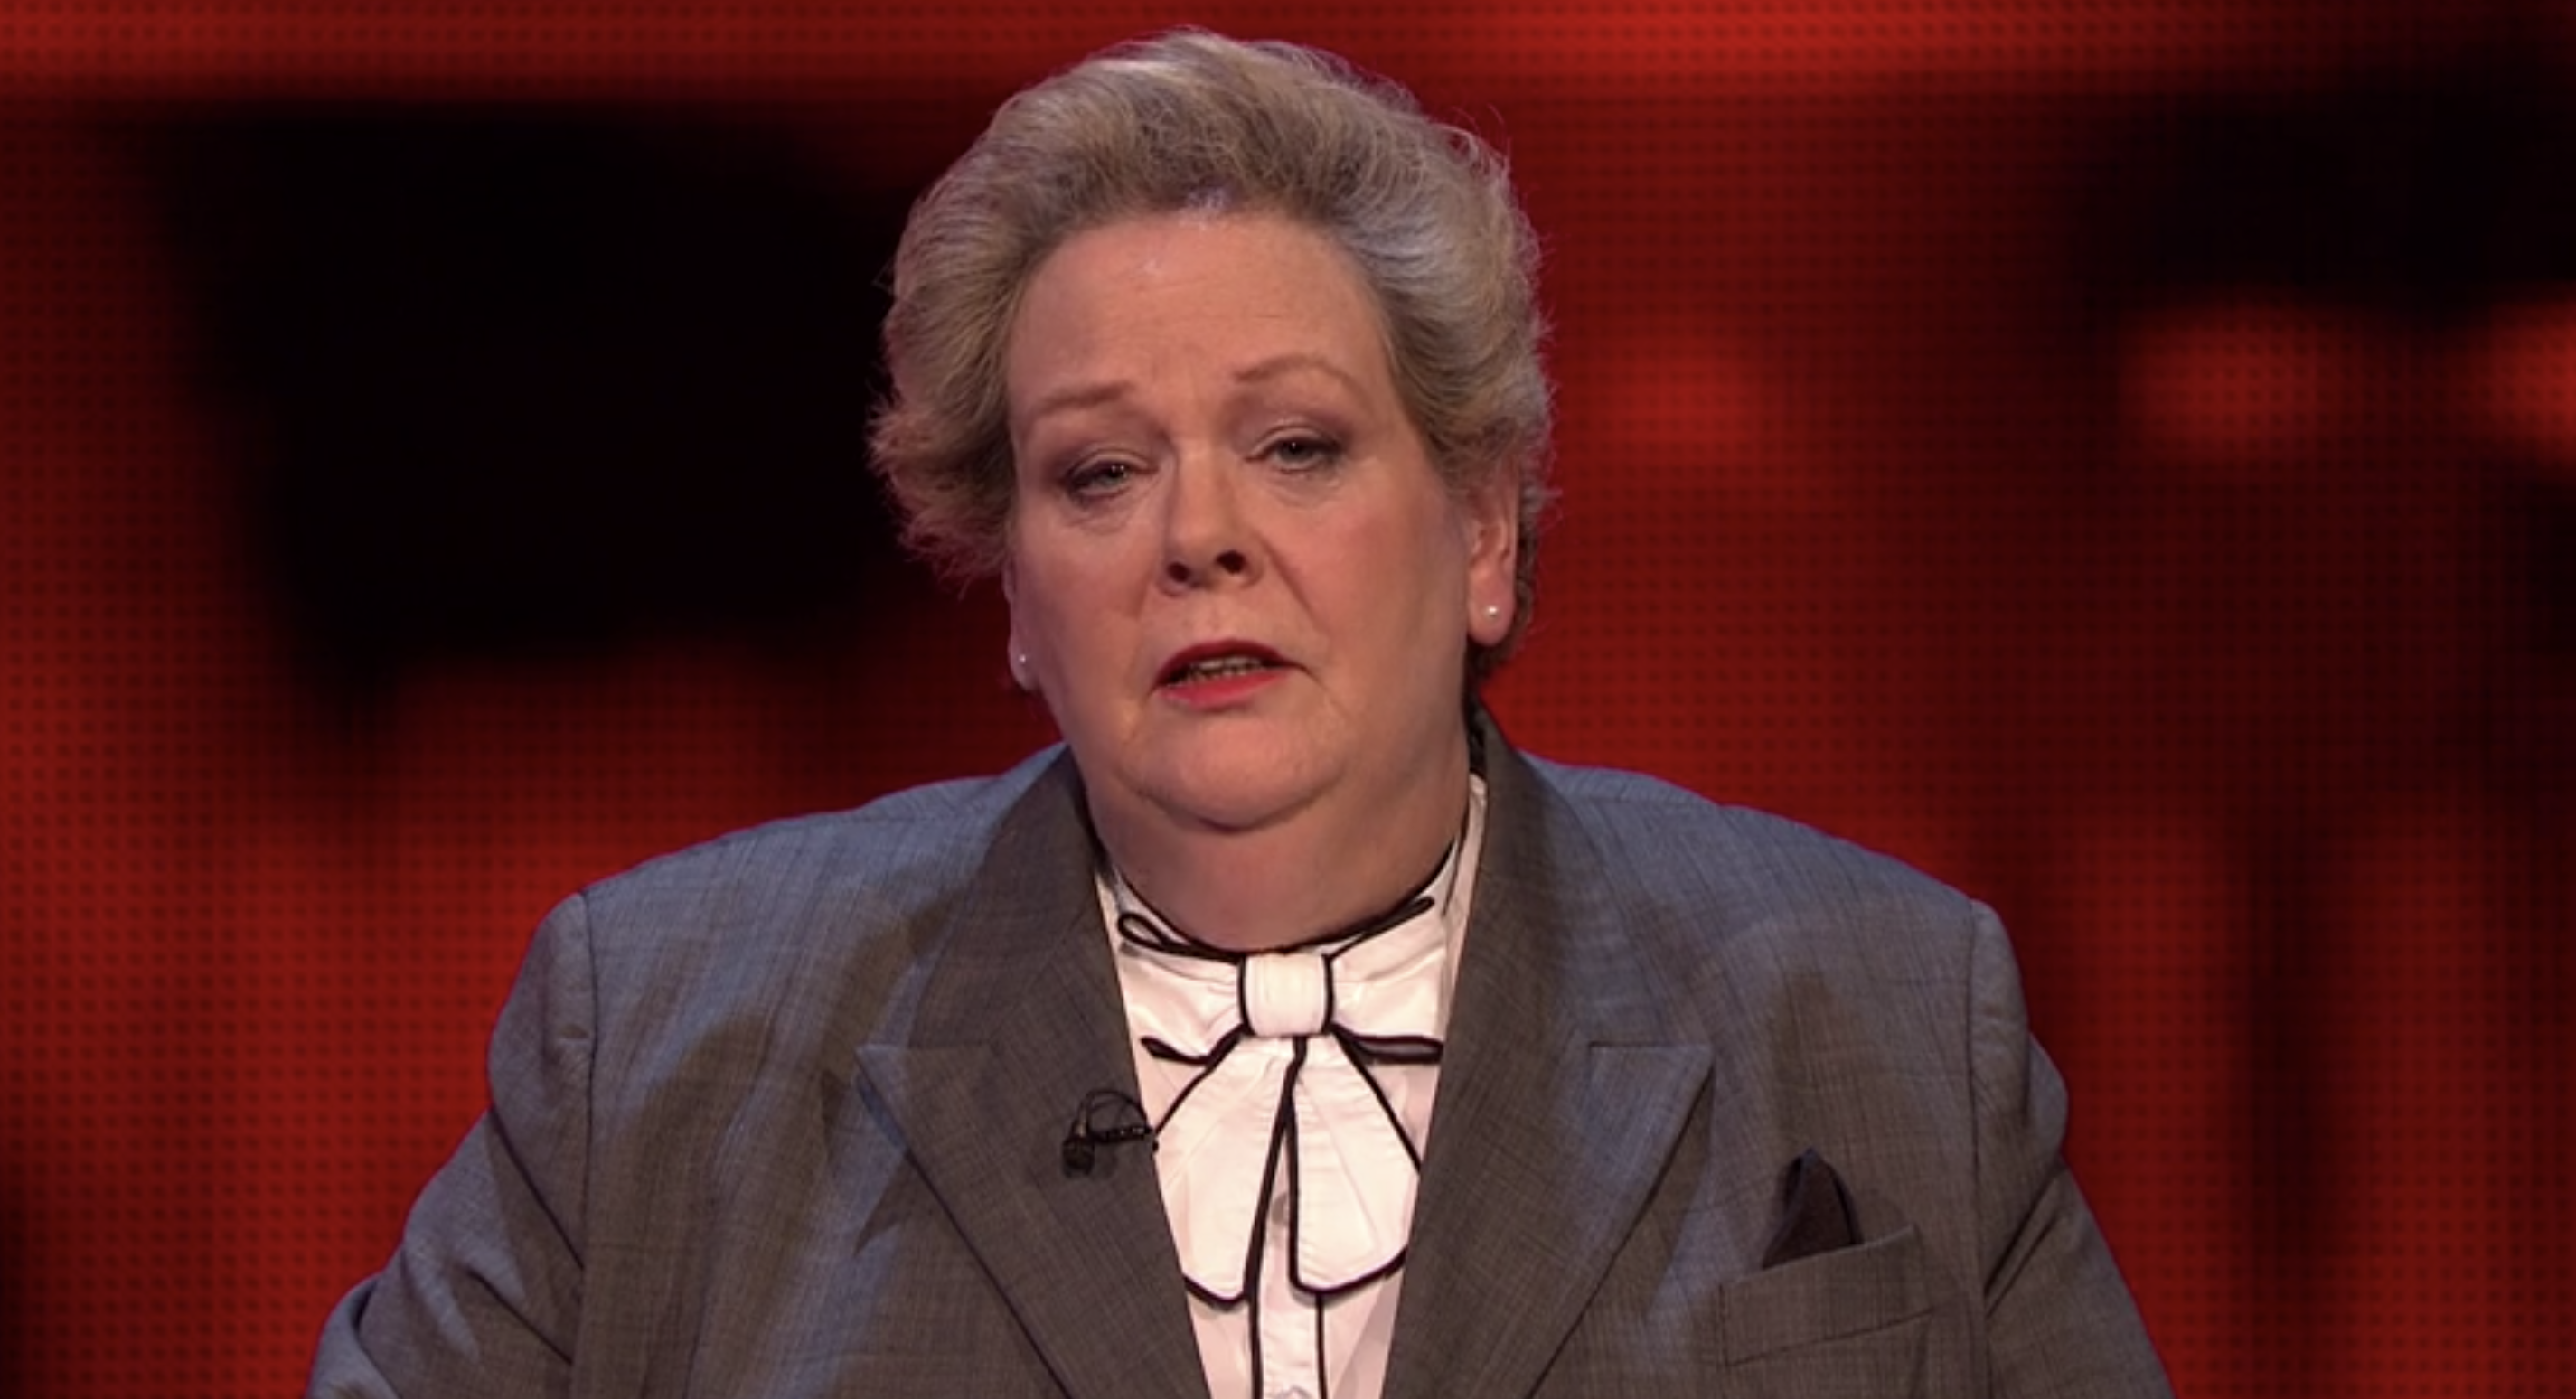 Anne Hegerty singing is everything viewers never knew they needed on The Chase!